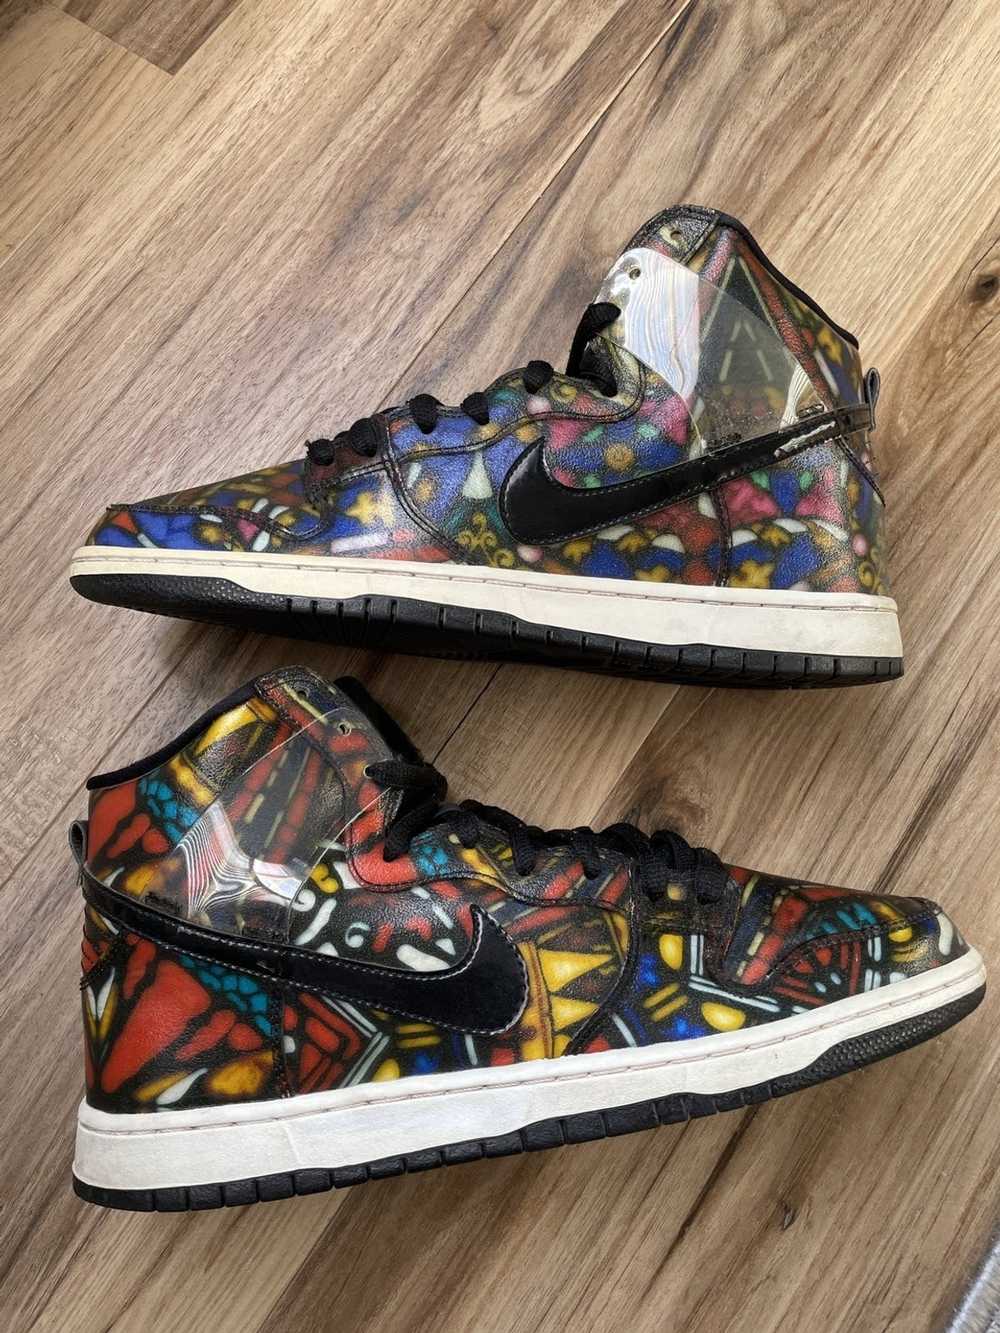 Nike Concepts x SB Dunk High Stained Glass 2015 - Gem